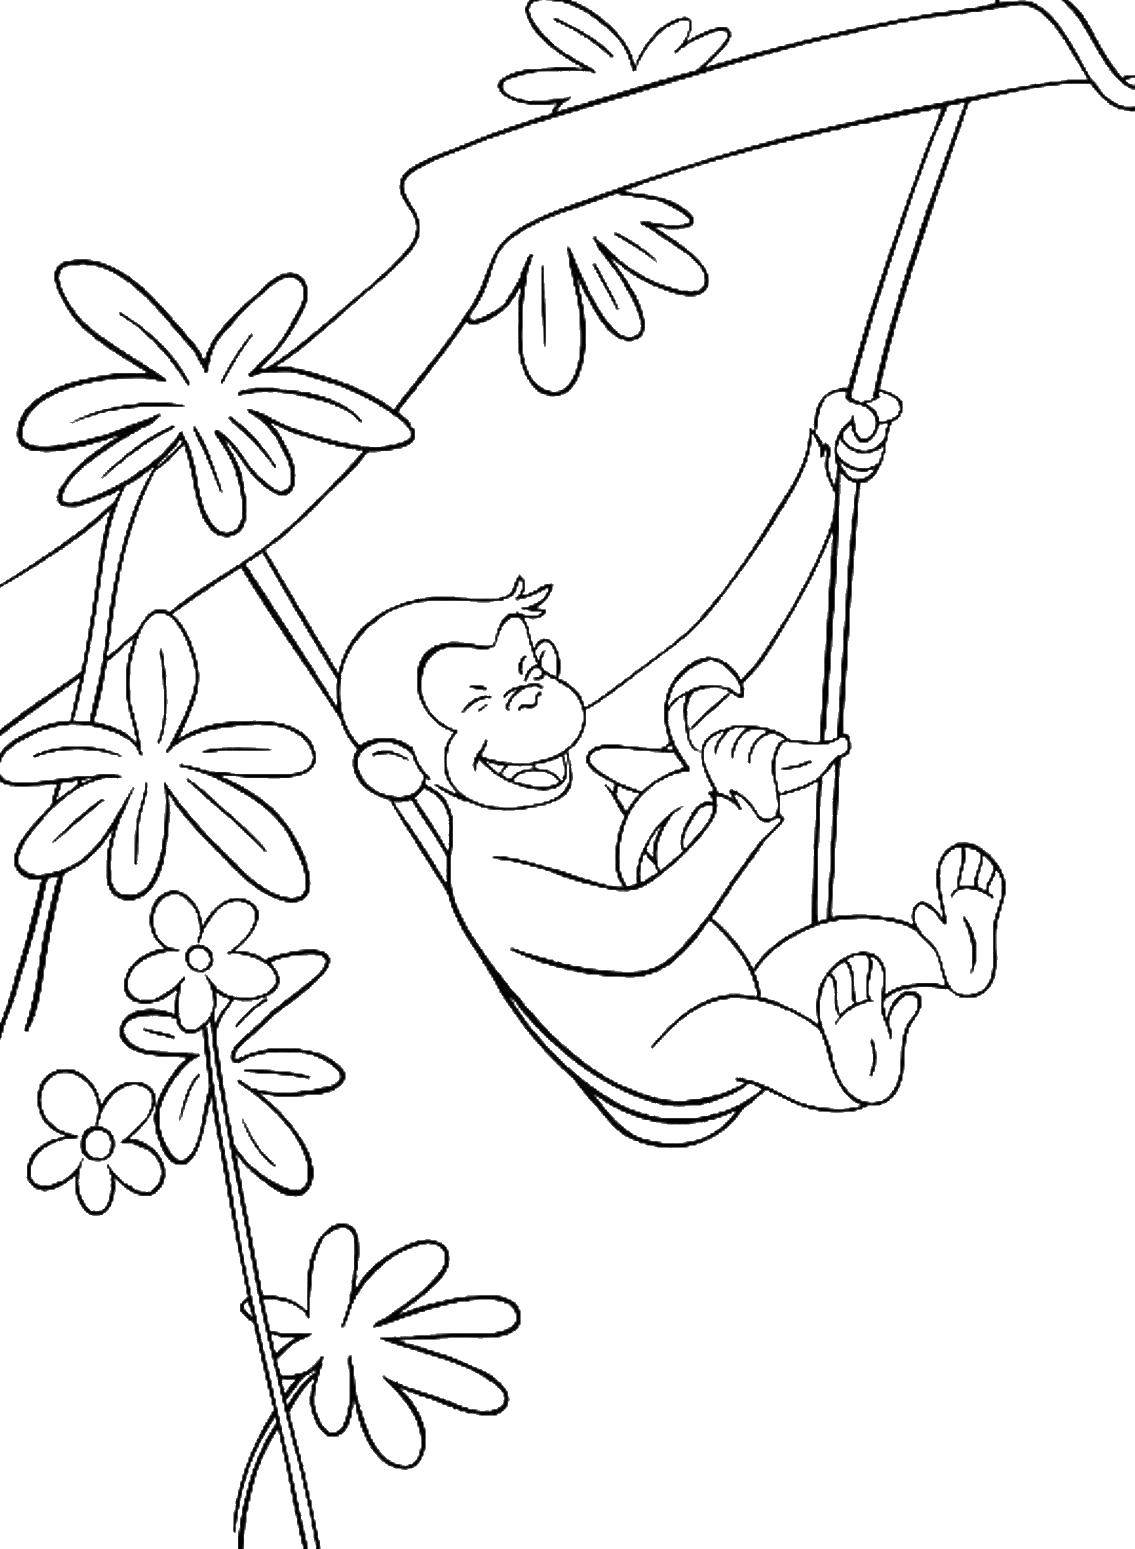 Coloring Monkey with banana. Category Animals. Tags:  Animals, monkey.